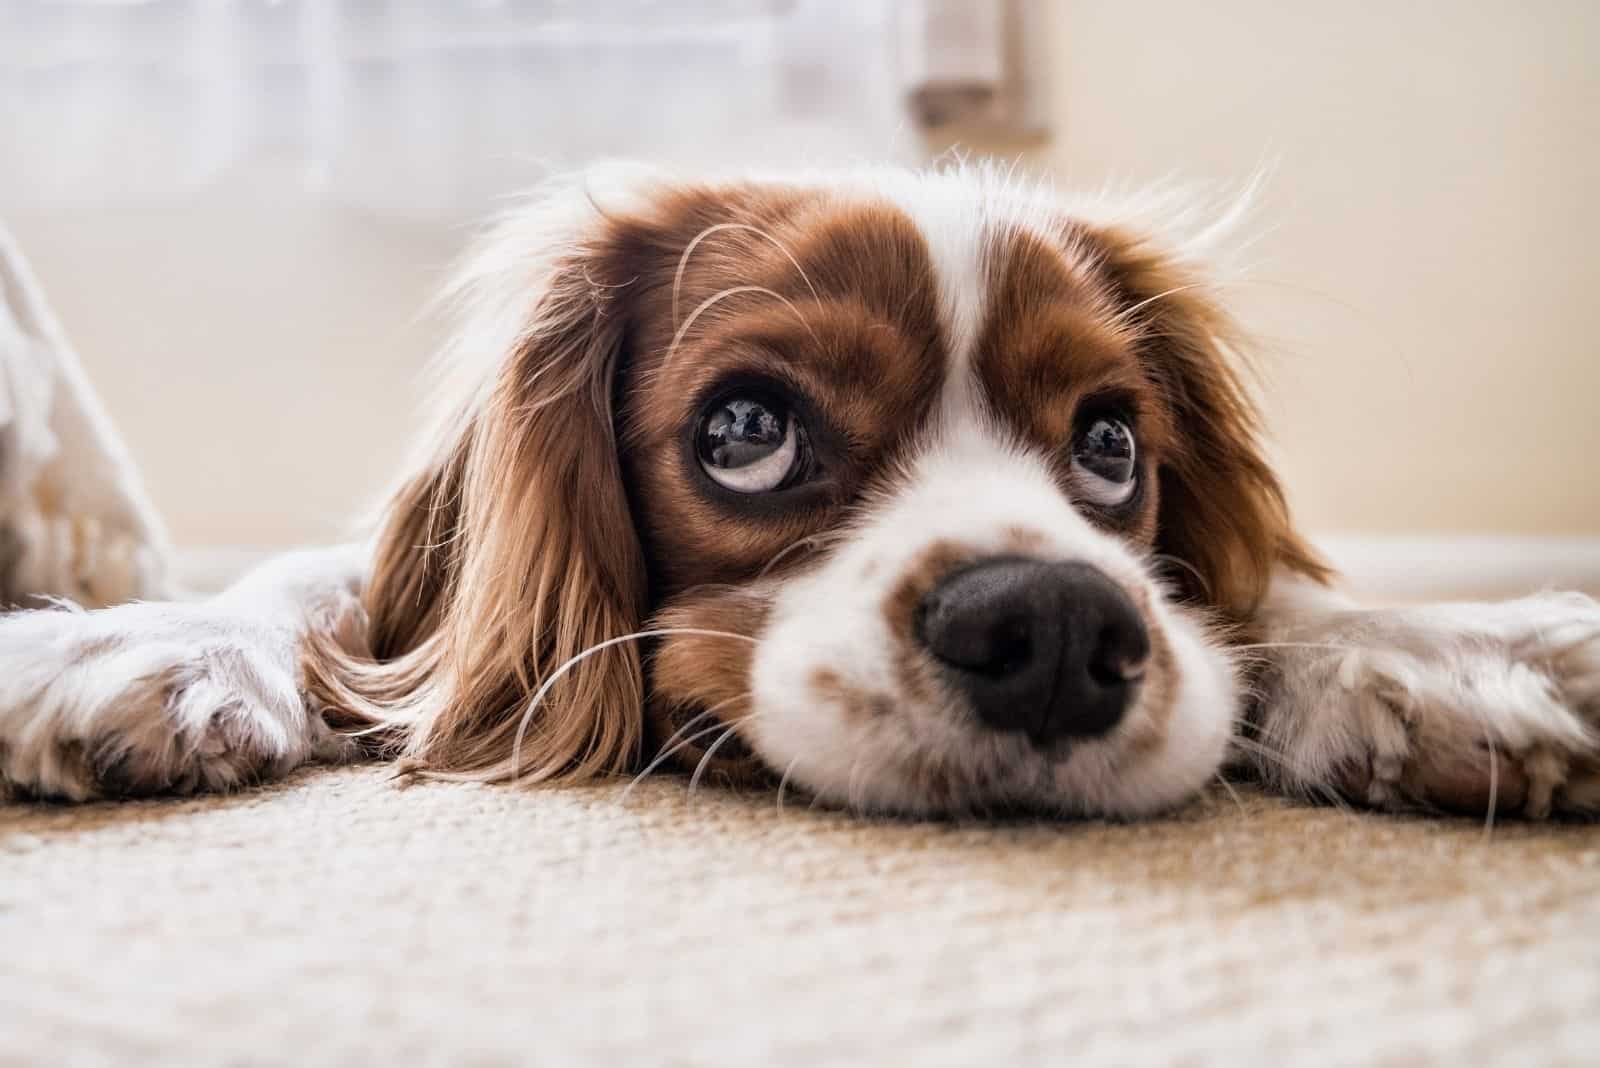 king charles spaniel dog face down on the floor